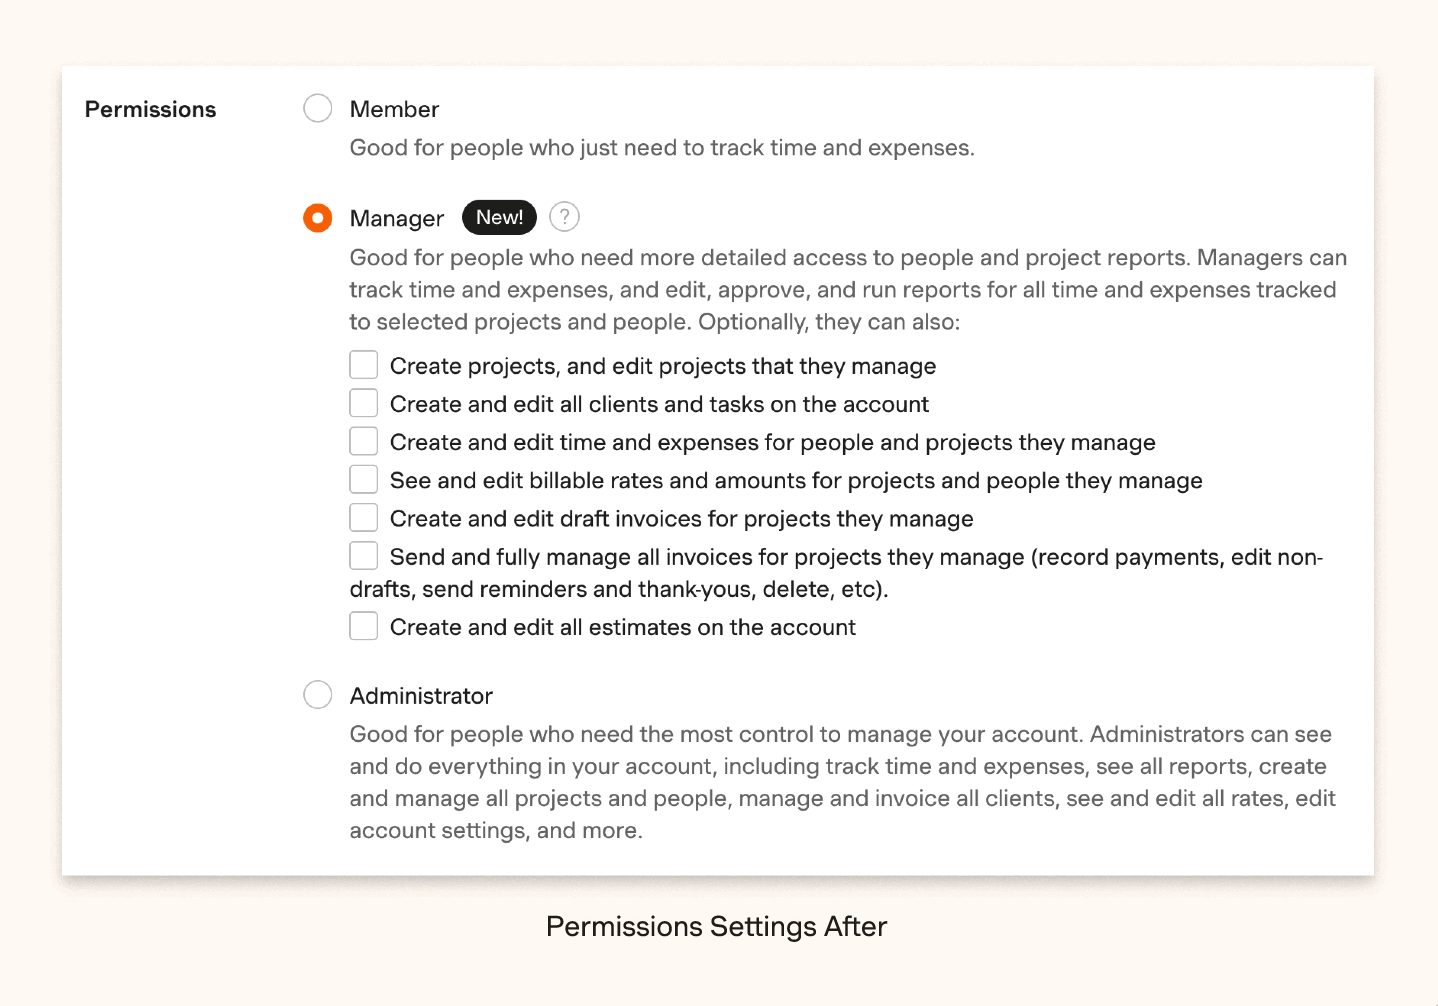 A GIF that shows an interface of permissions settings before and after new features. Before shows 3 additional permissions you can grant a user. After shows 7 additional settings you can grant a user.